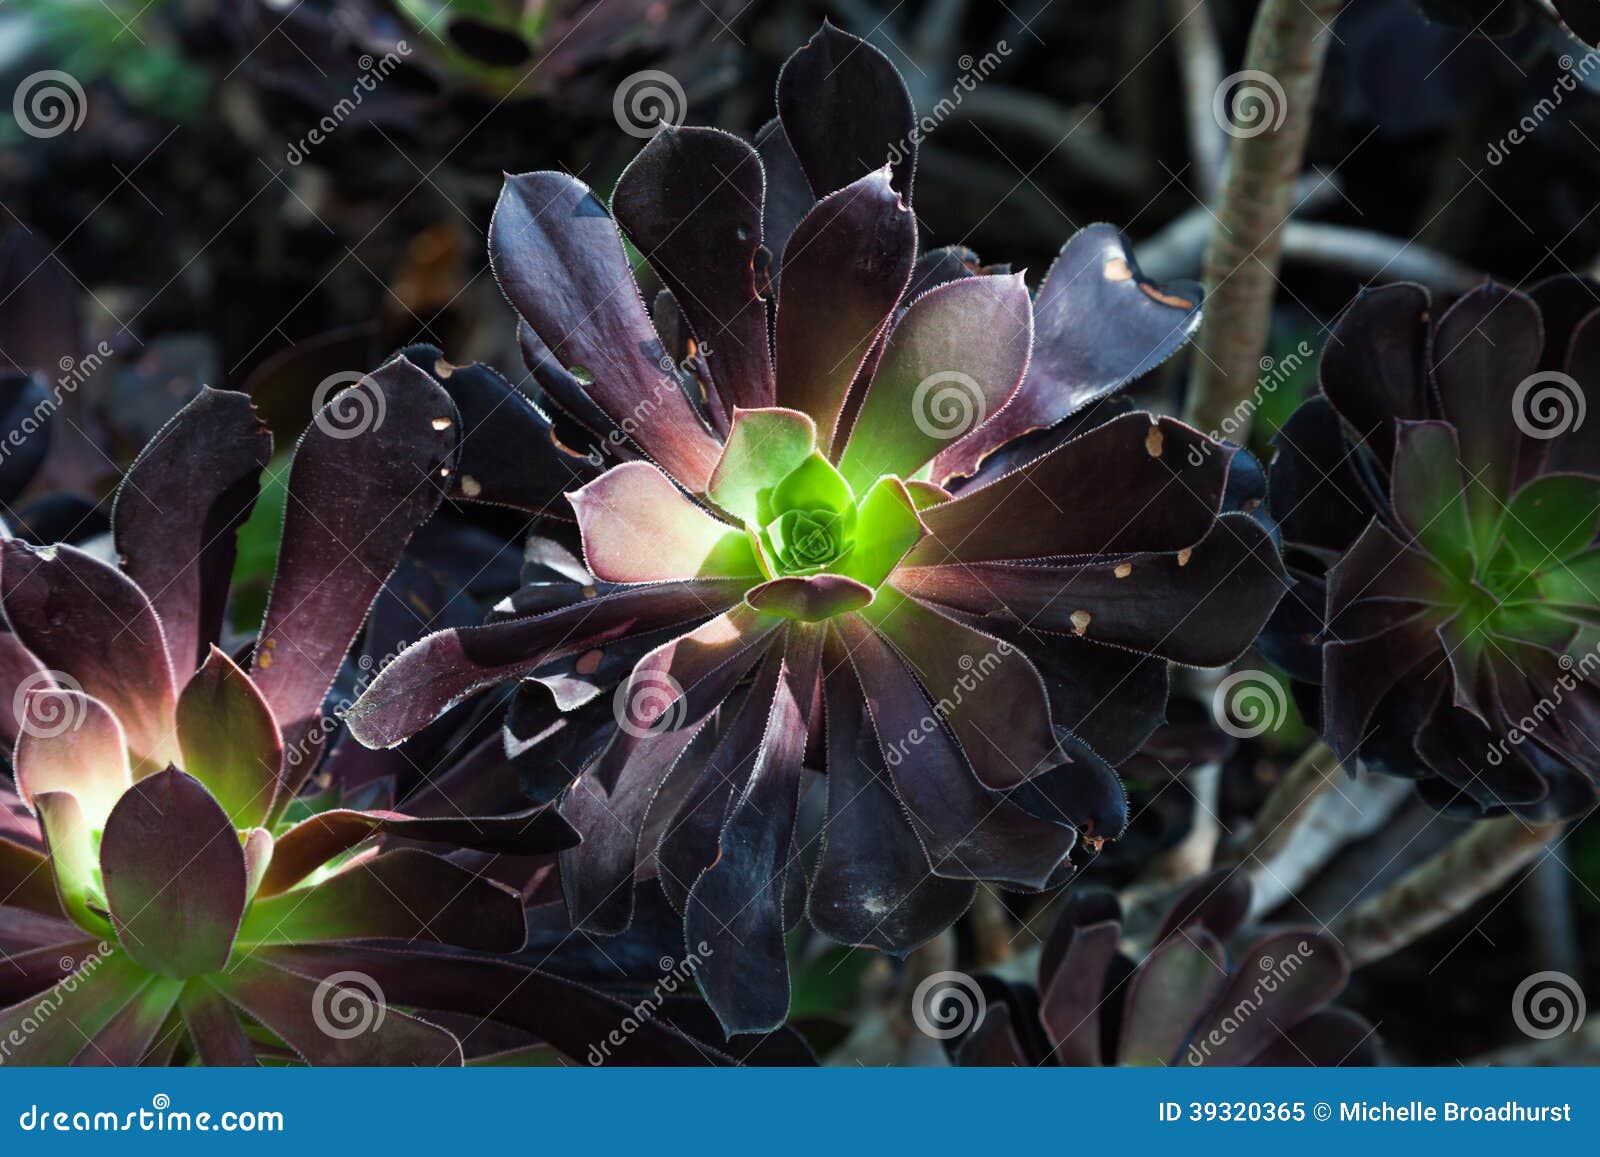 Purple and Green Succulent Plant Background Stock Image - Image of ...